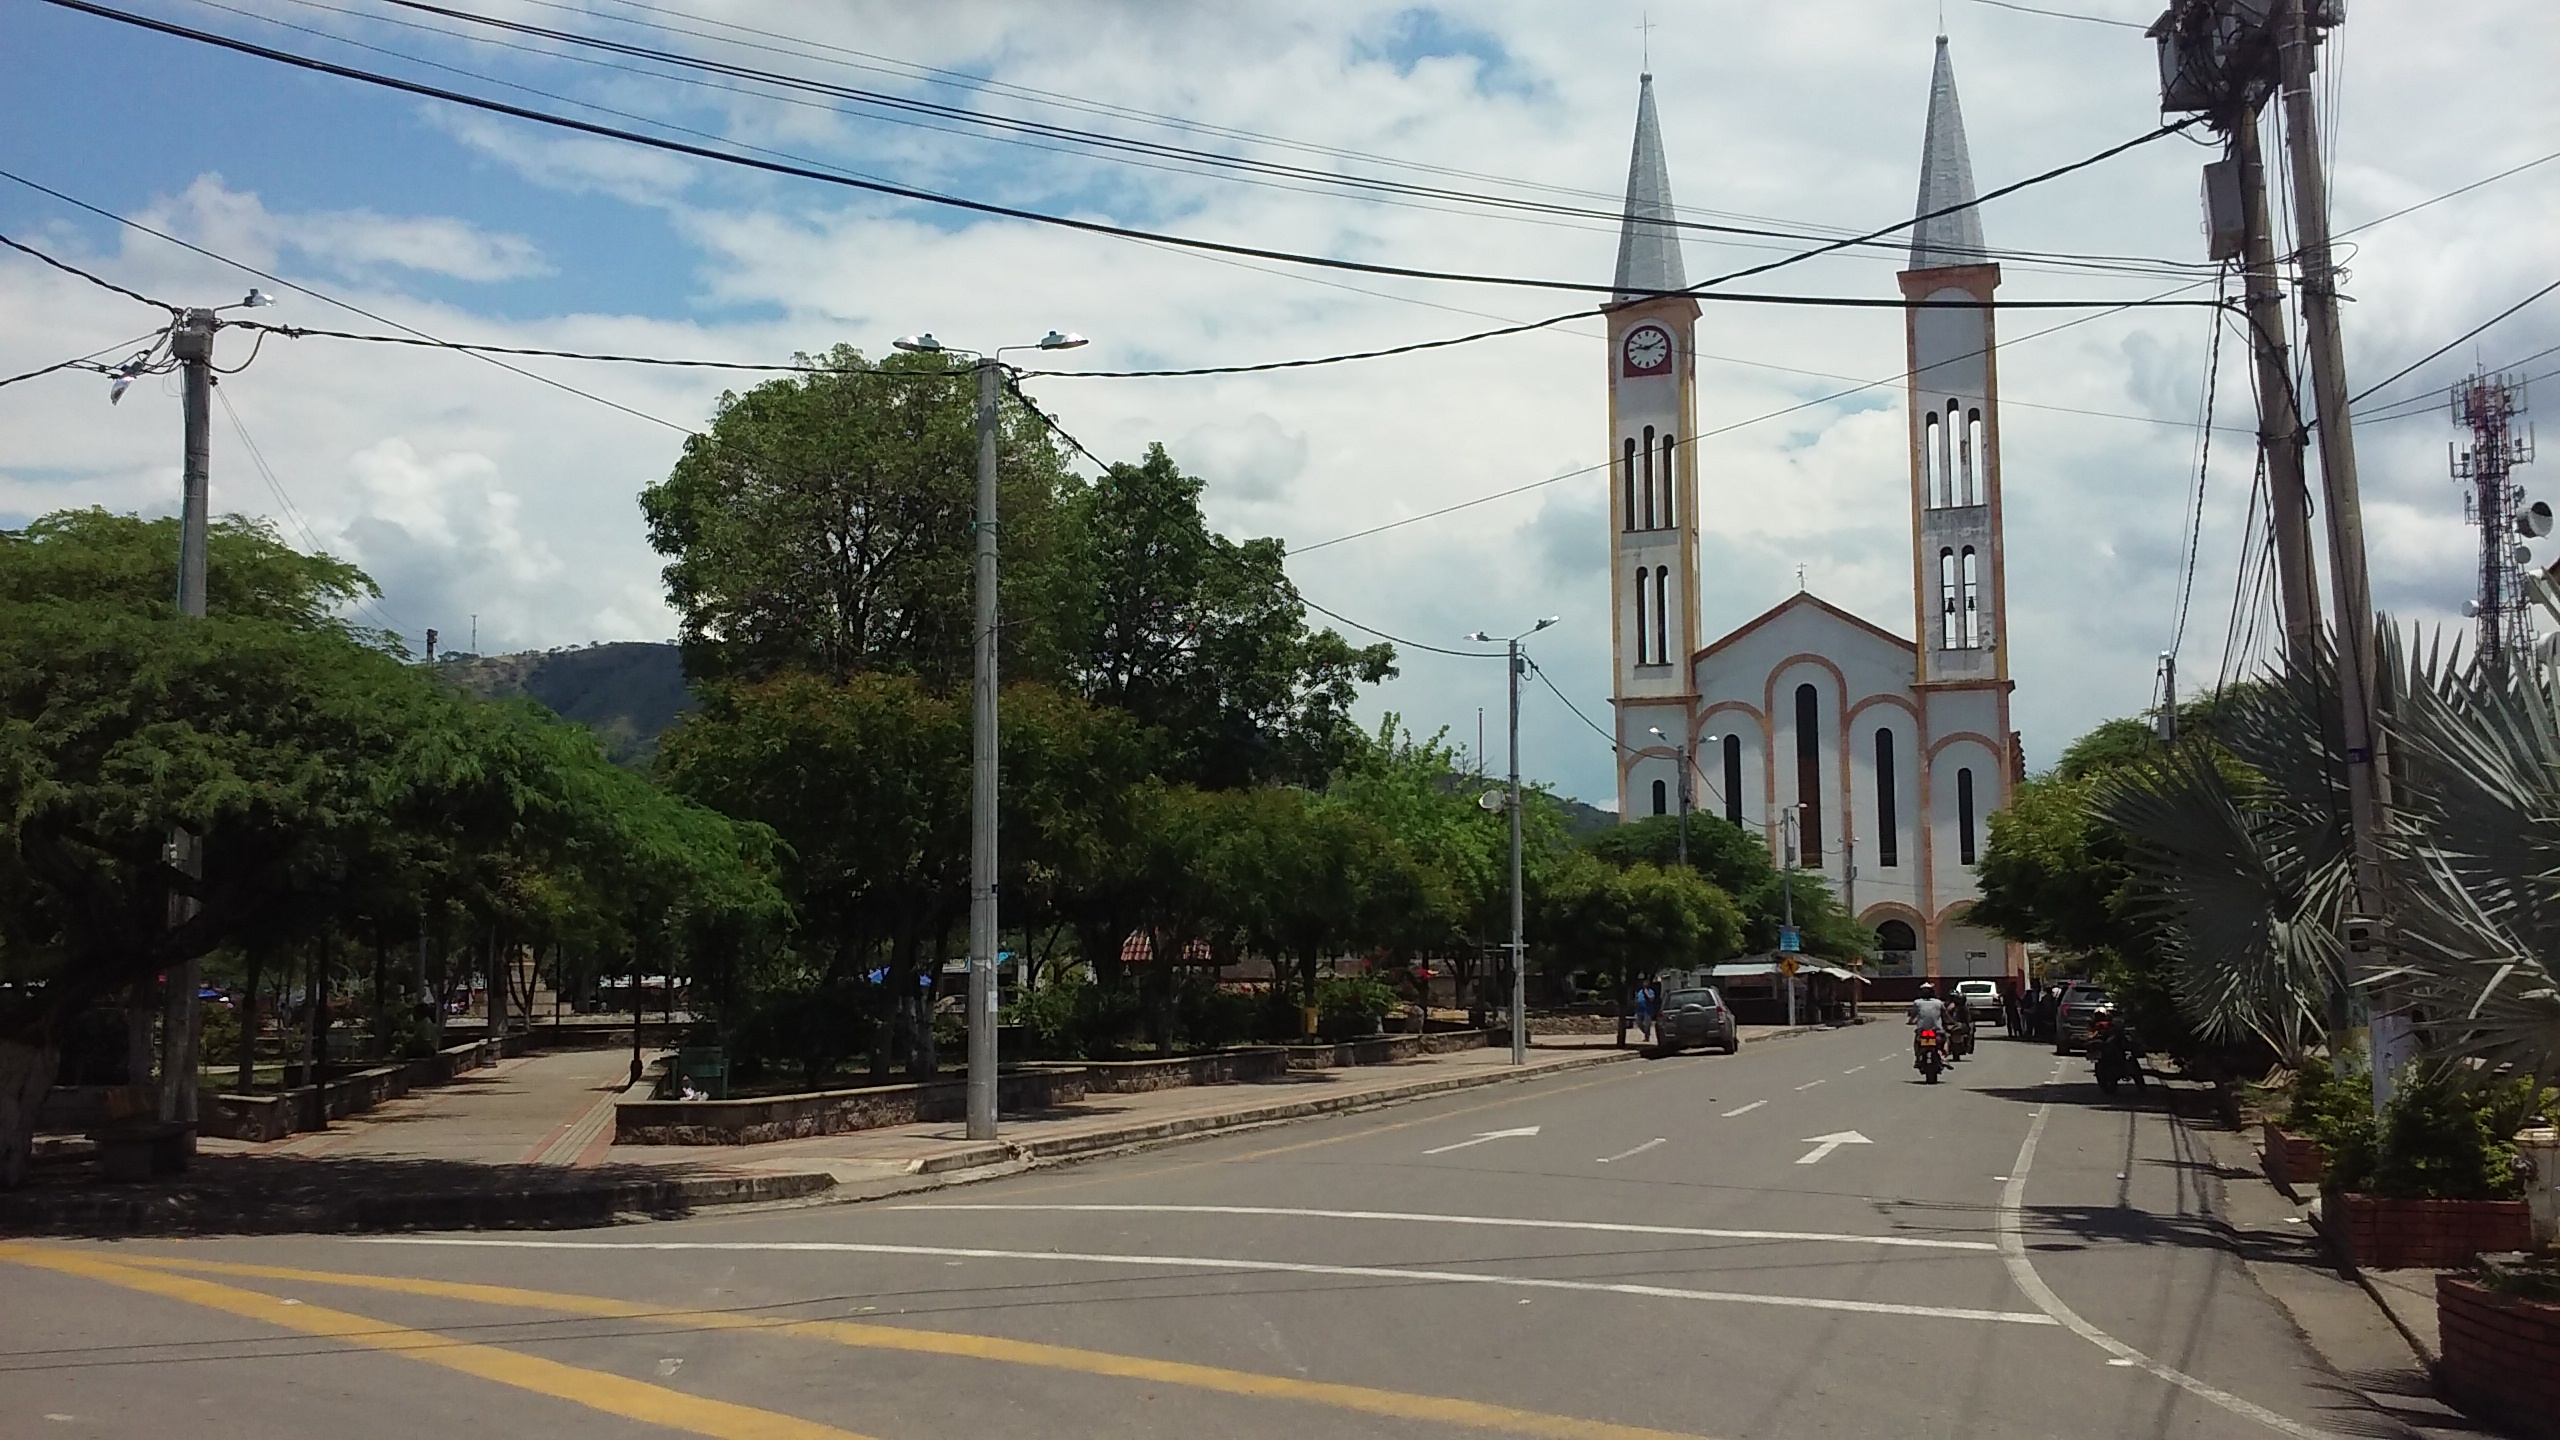 The main square in Tocaima, Cundinamarca, Colombia.